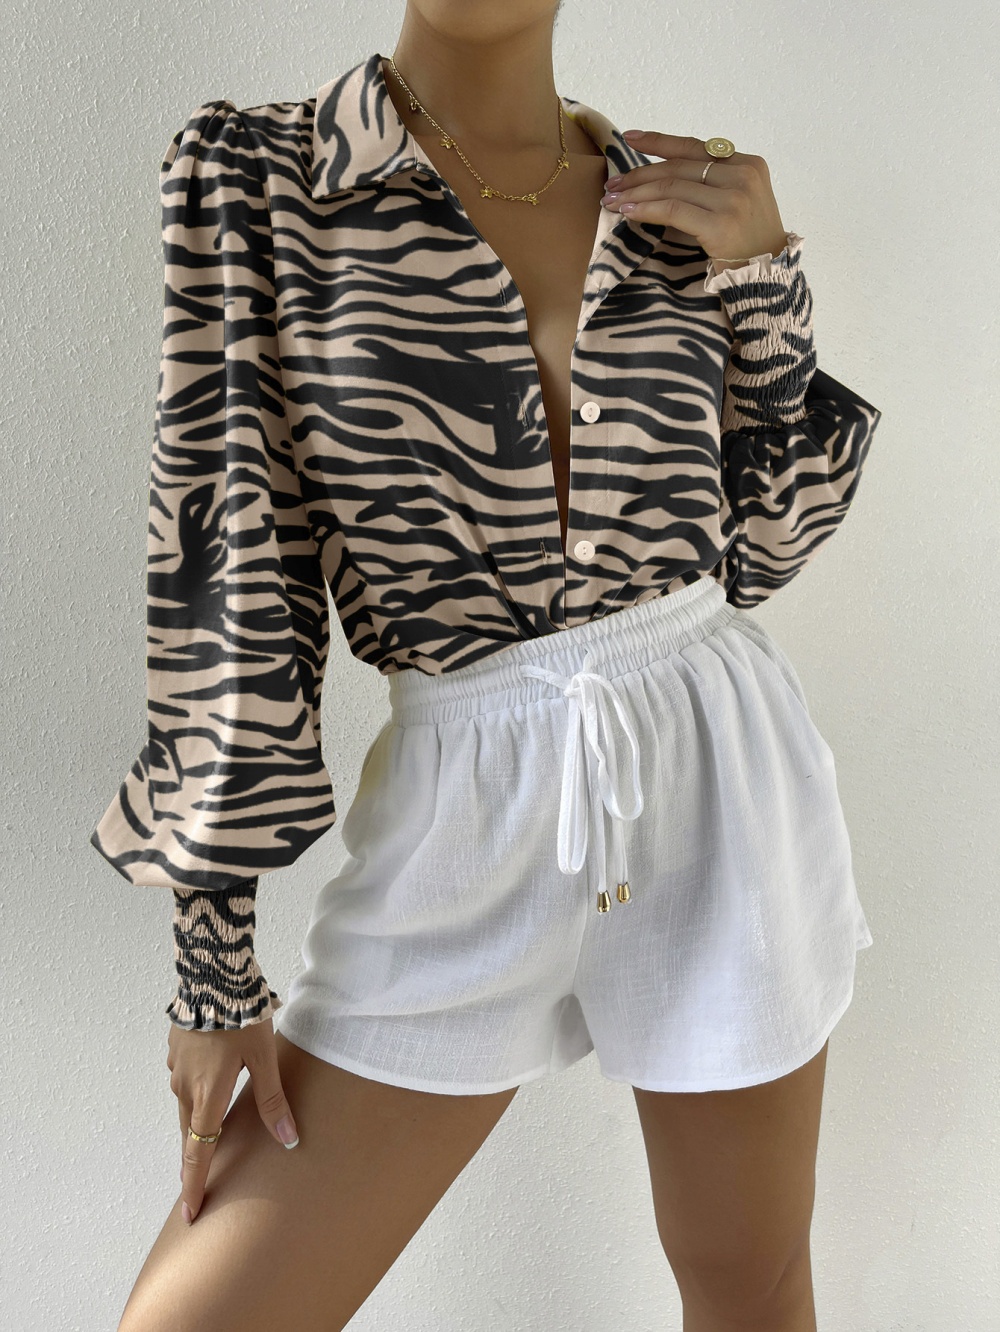 Leopard sexy all-match shirt vacation Casual tops for women